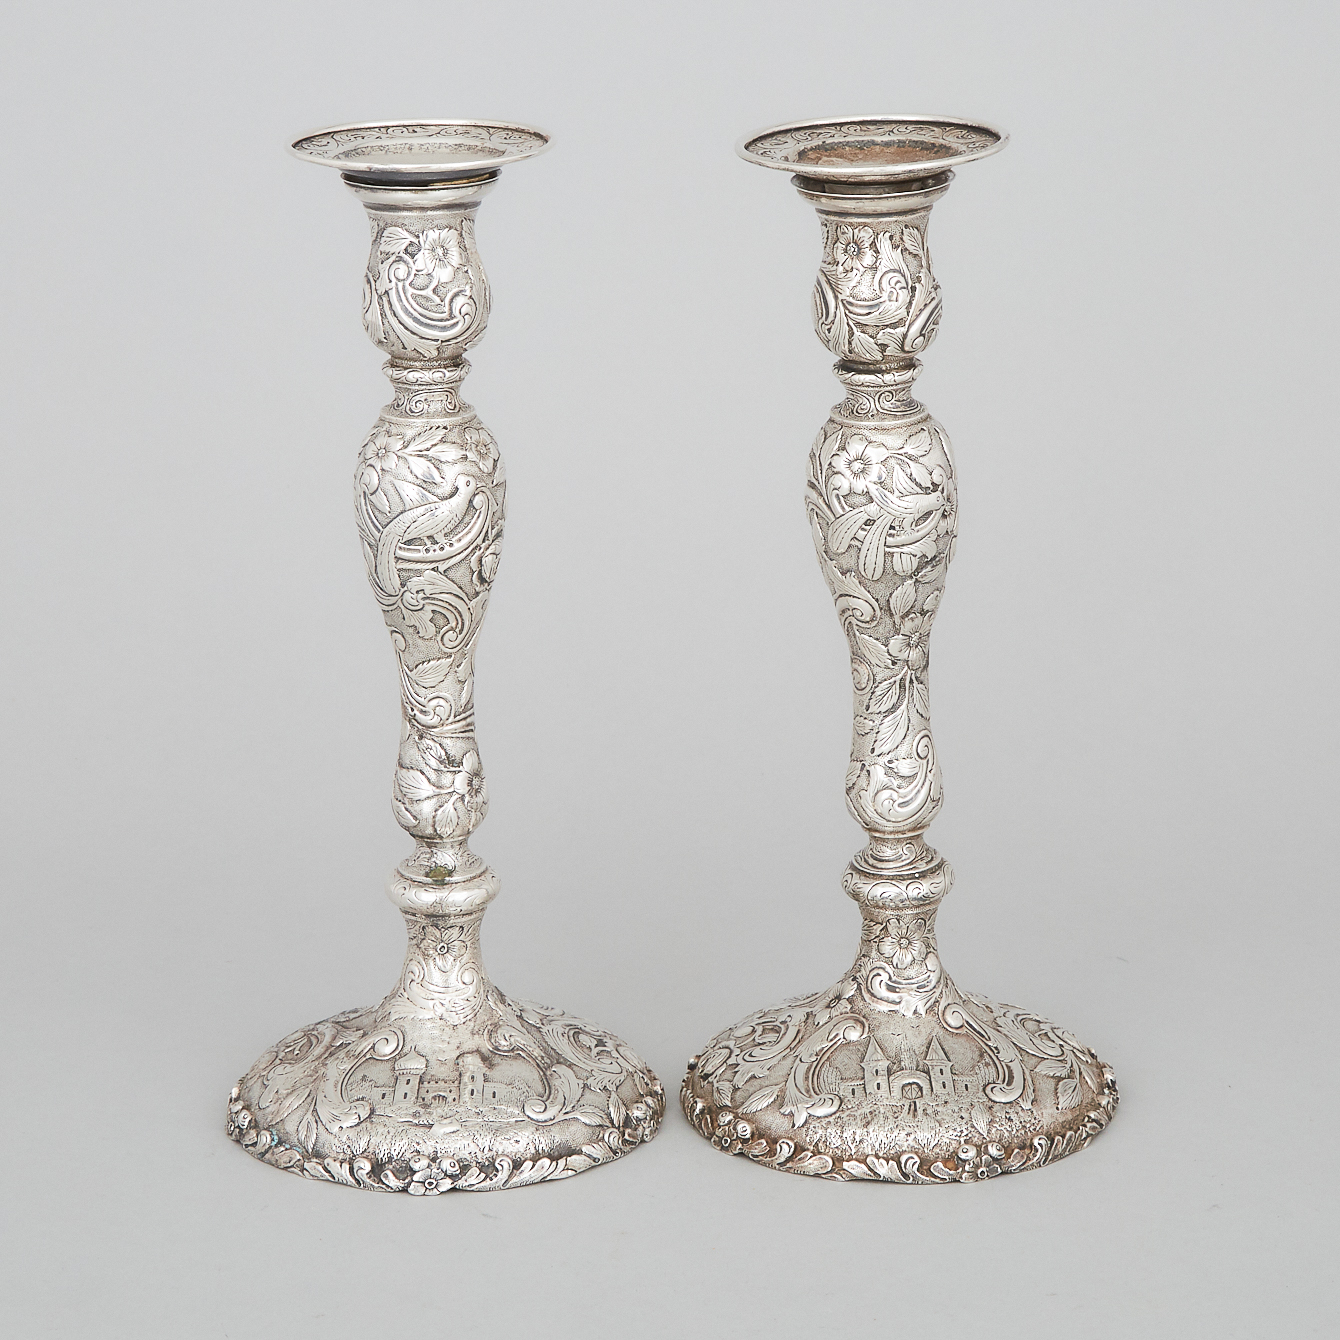 Pair of American Silver 'Castle Pattern' Table Candlesticks, Loring Andrews Co., Cincinnati, OH, early 20th century 